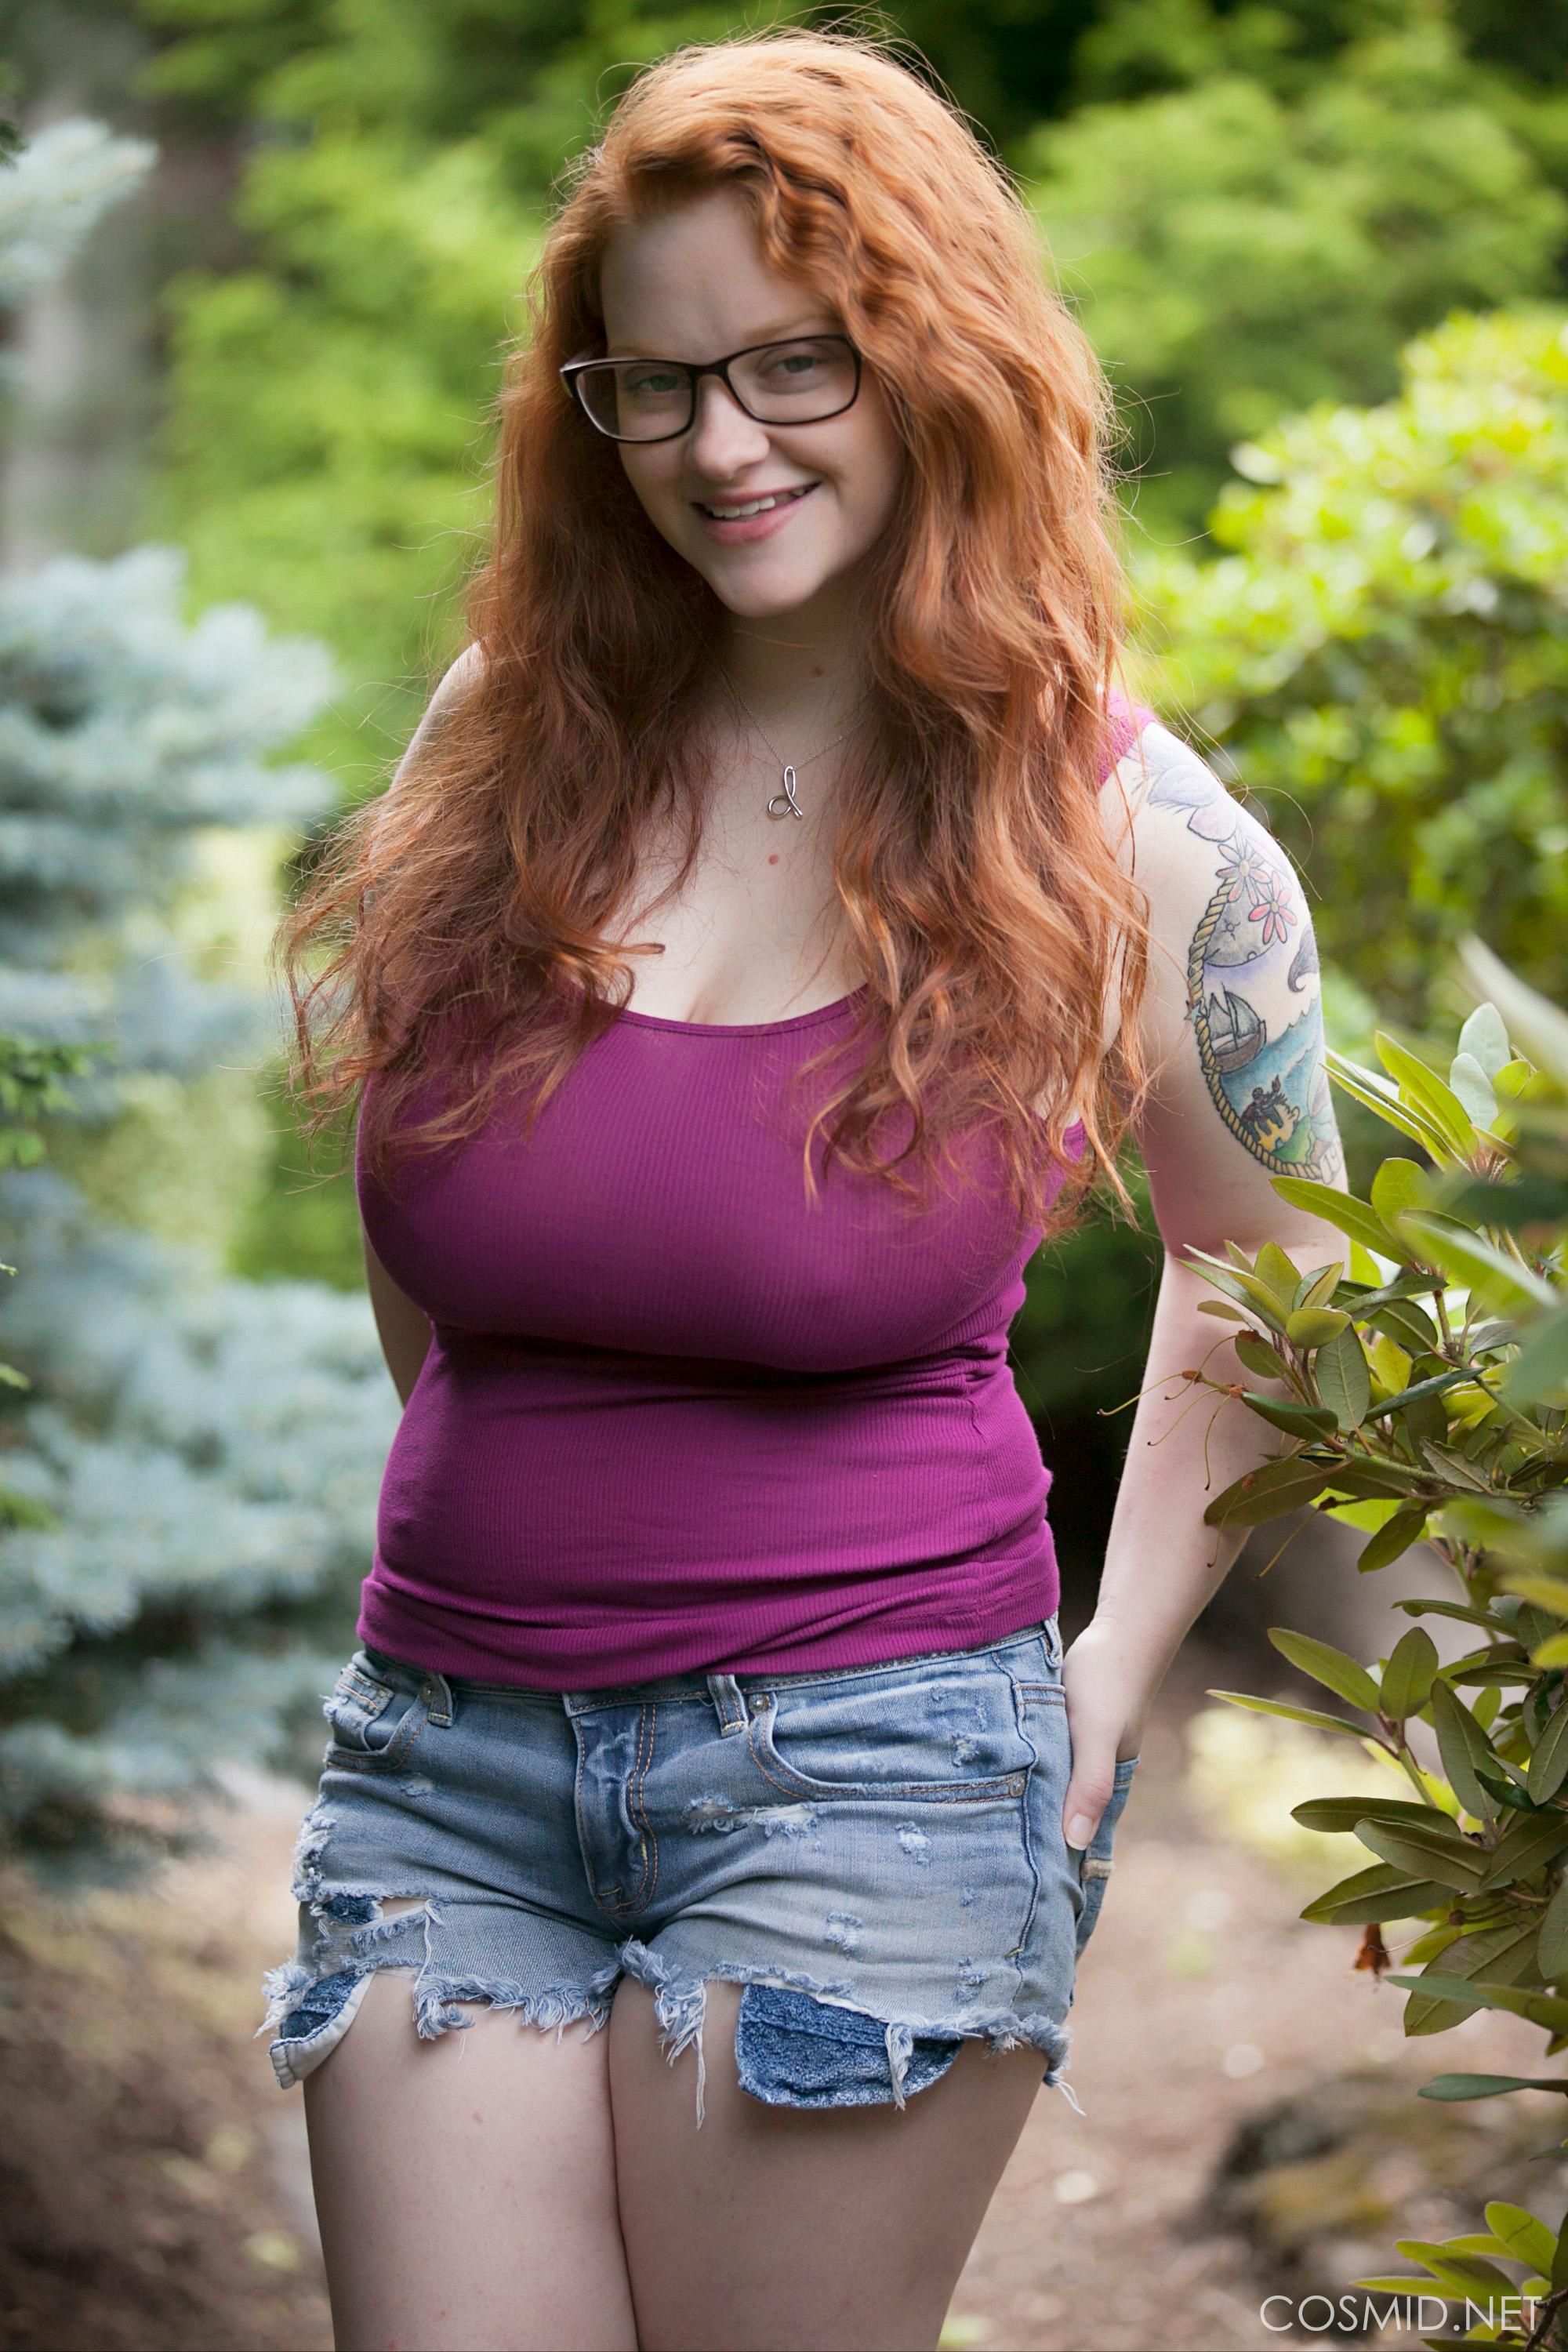 Bbw Big Tits Glasses - Chubby redhead with big tits Kaycee Barnes looks adorable in her glasses as  she gets nude